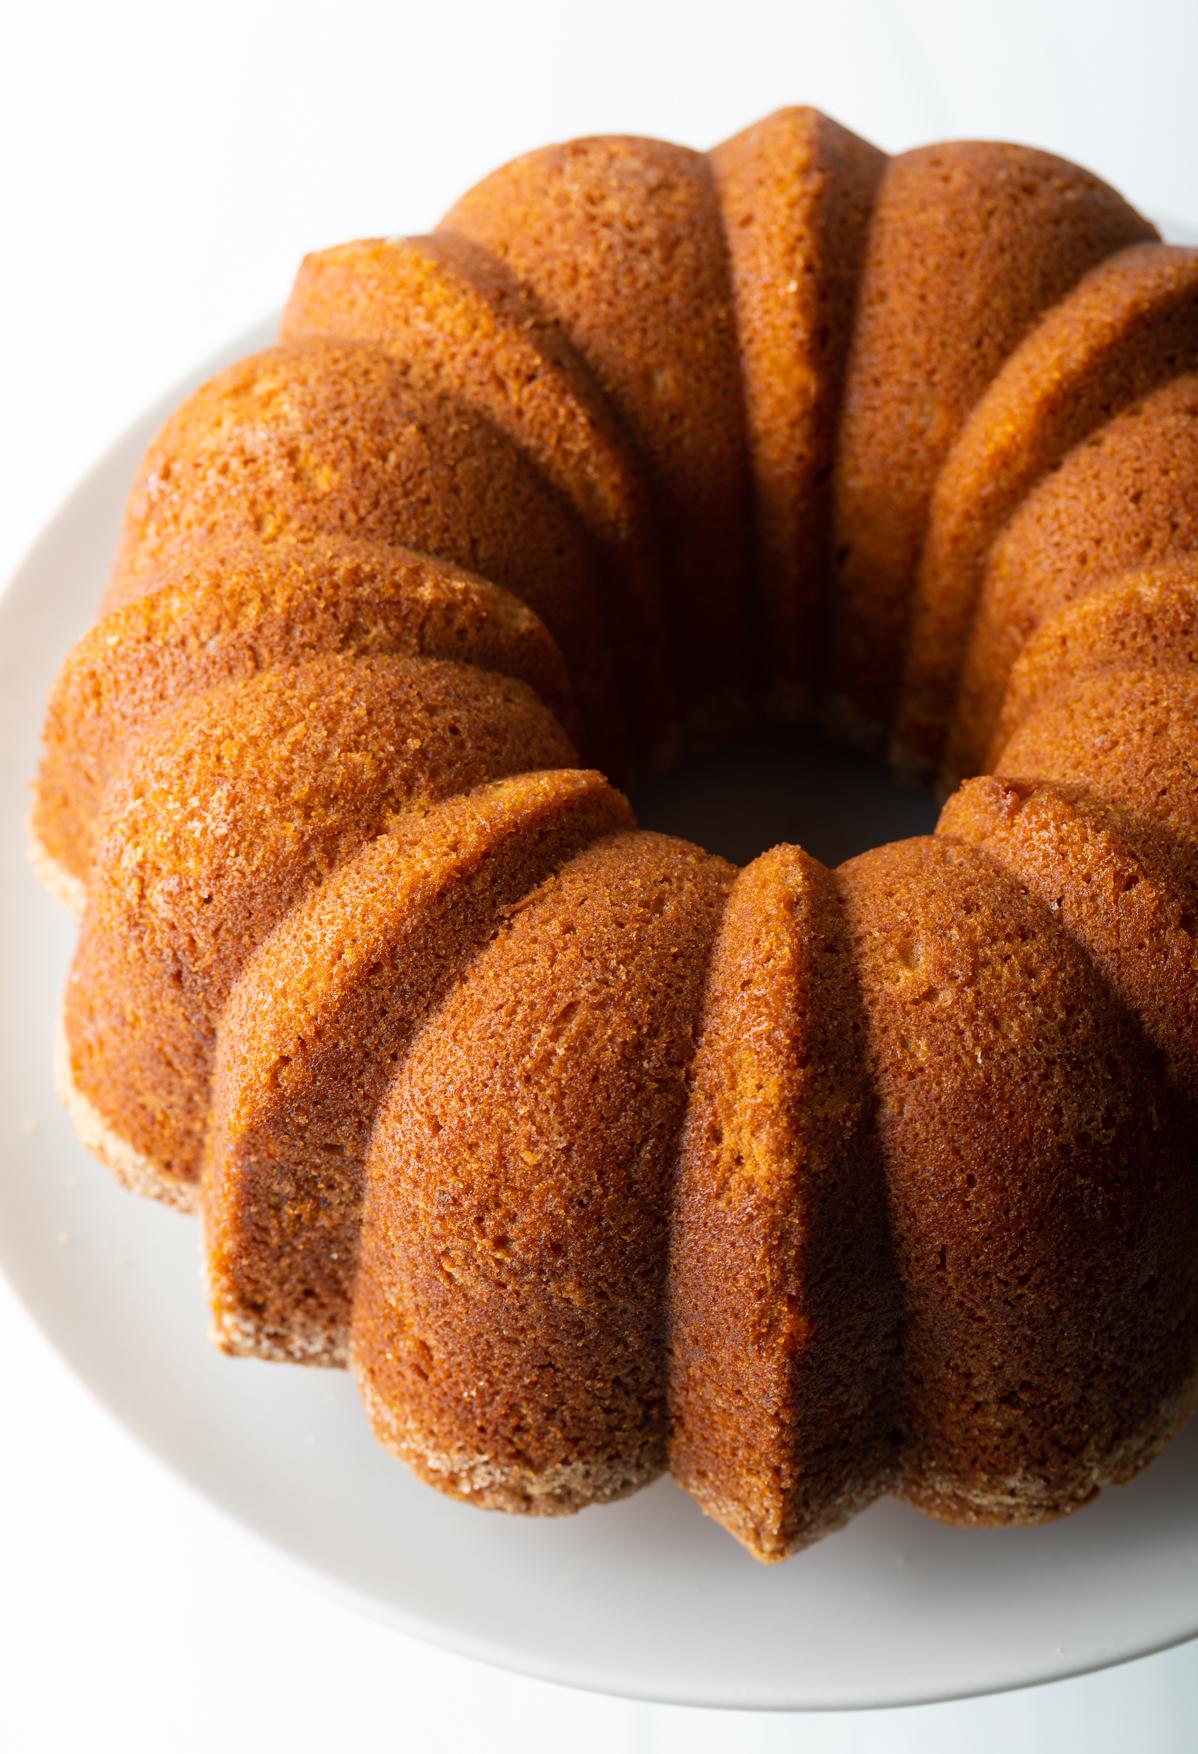  Swap out your traditional pumpkin pie for this delicious Sweet Potato & Orange Pound Cake.